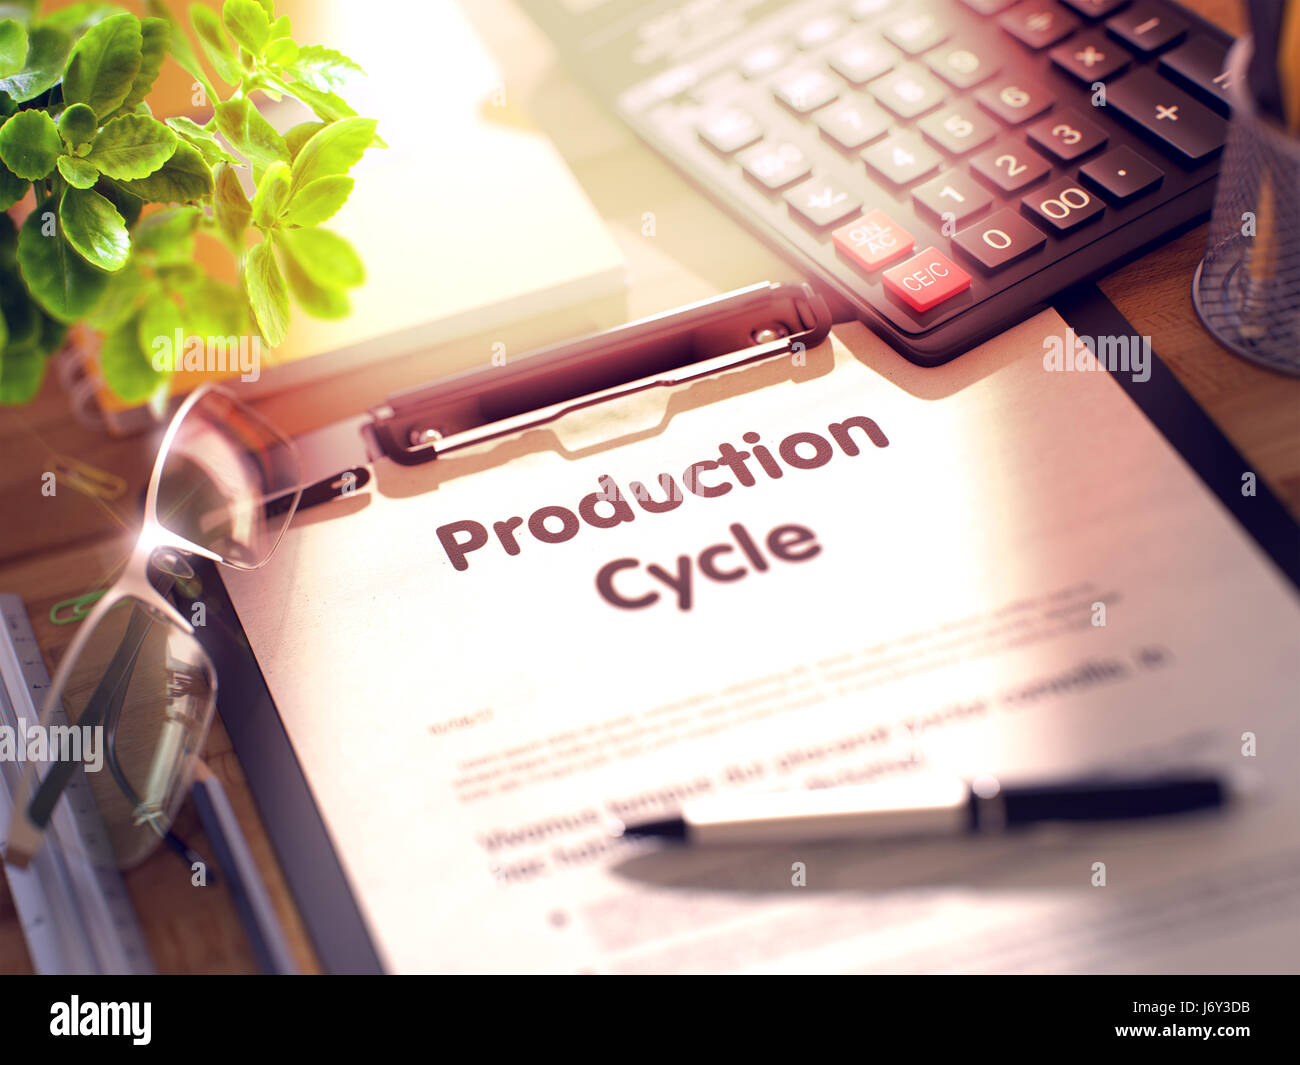 Production Cycle Concept on Clipboard. 3D. Stock Photo